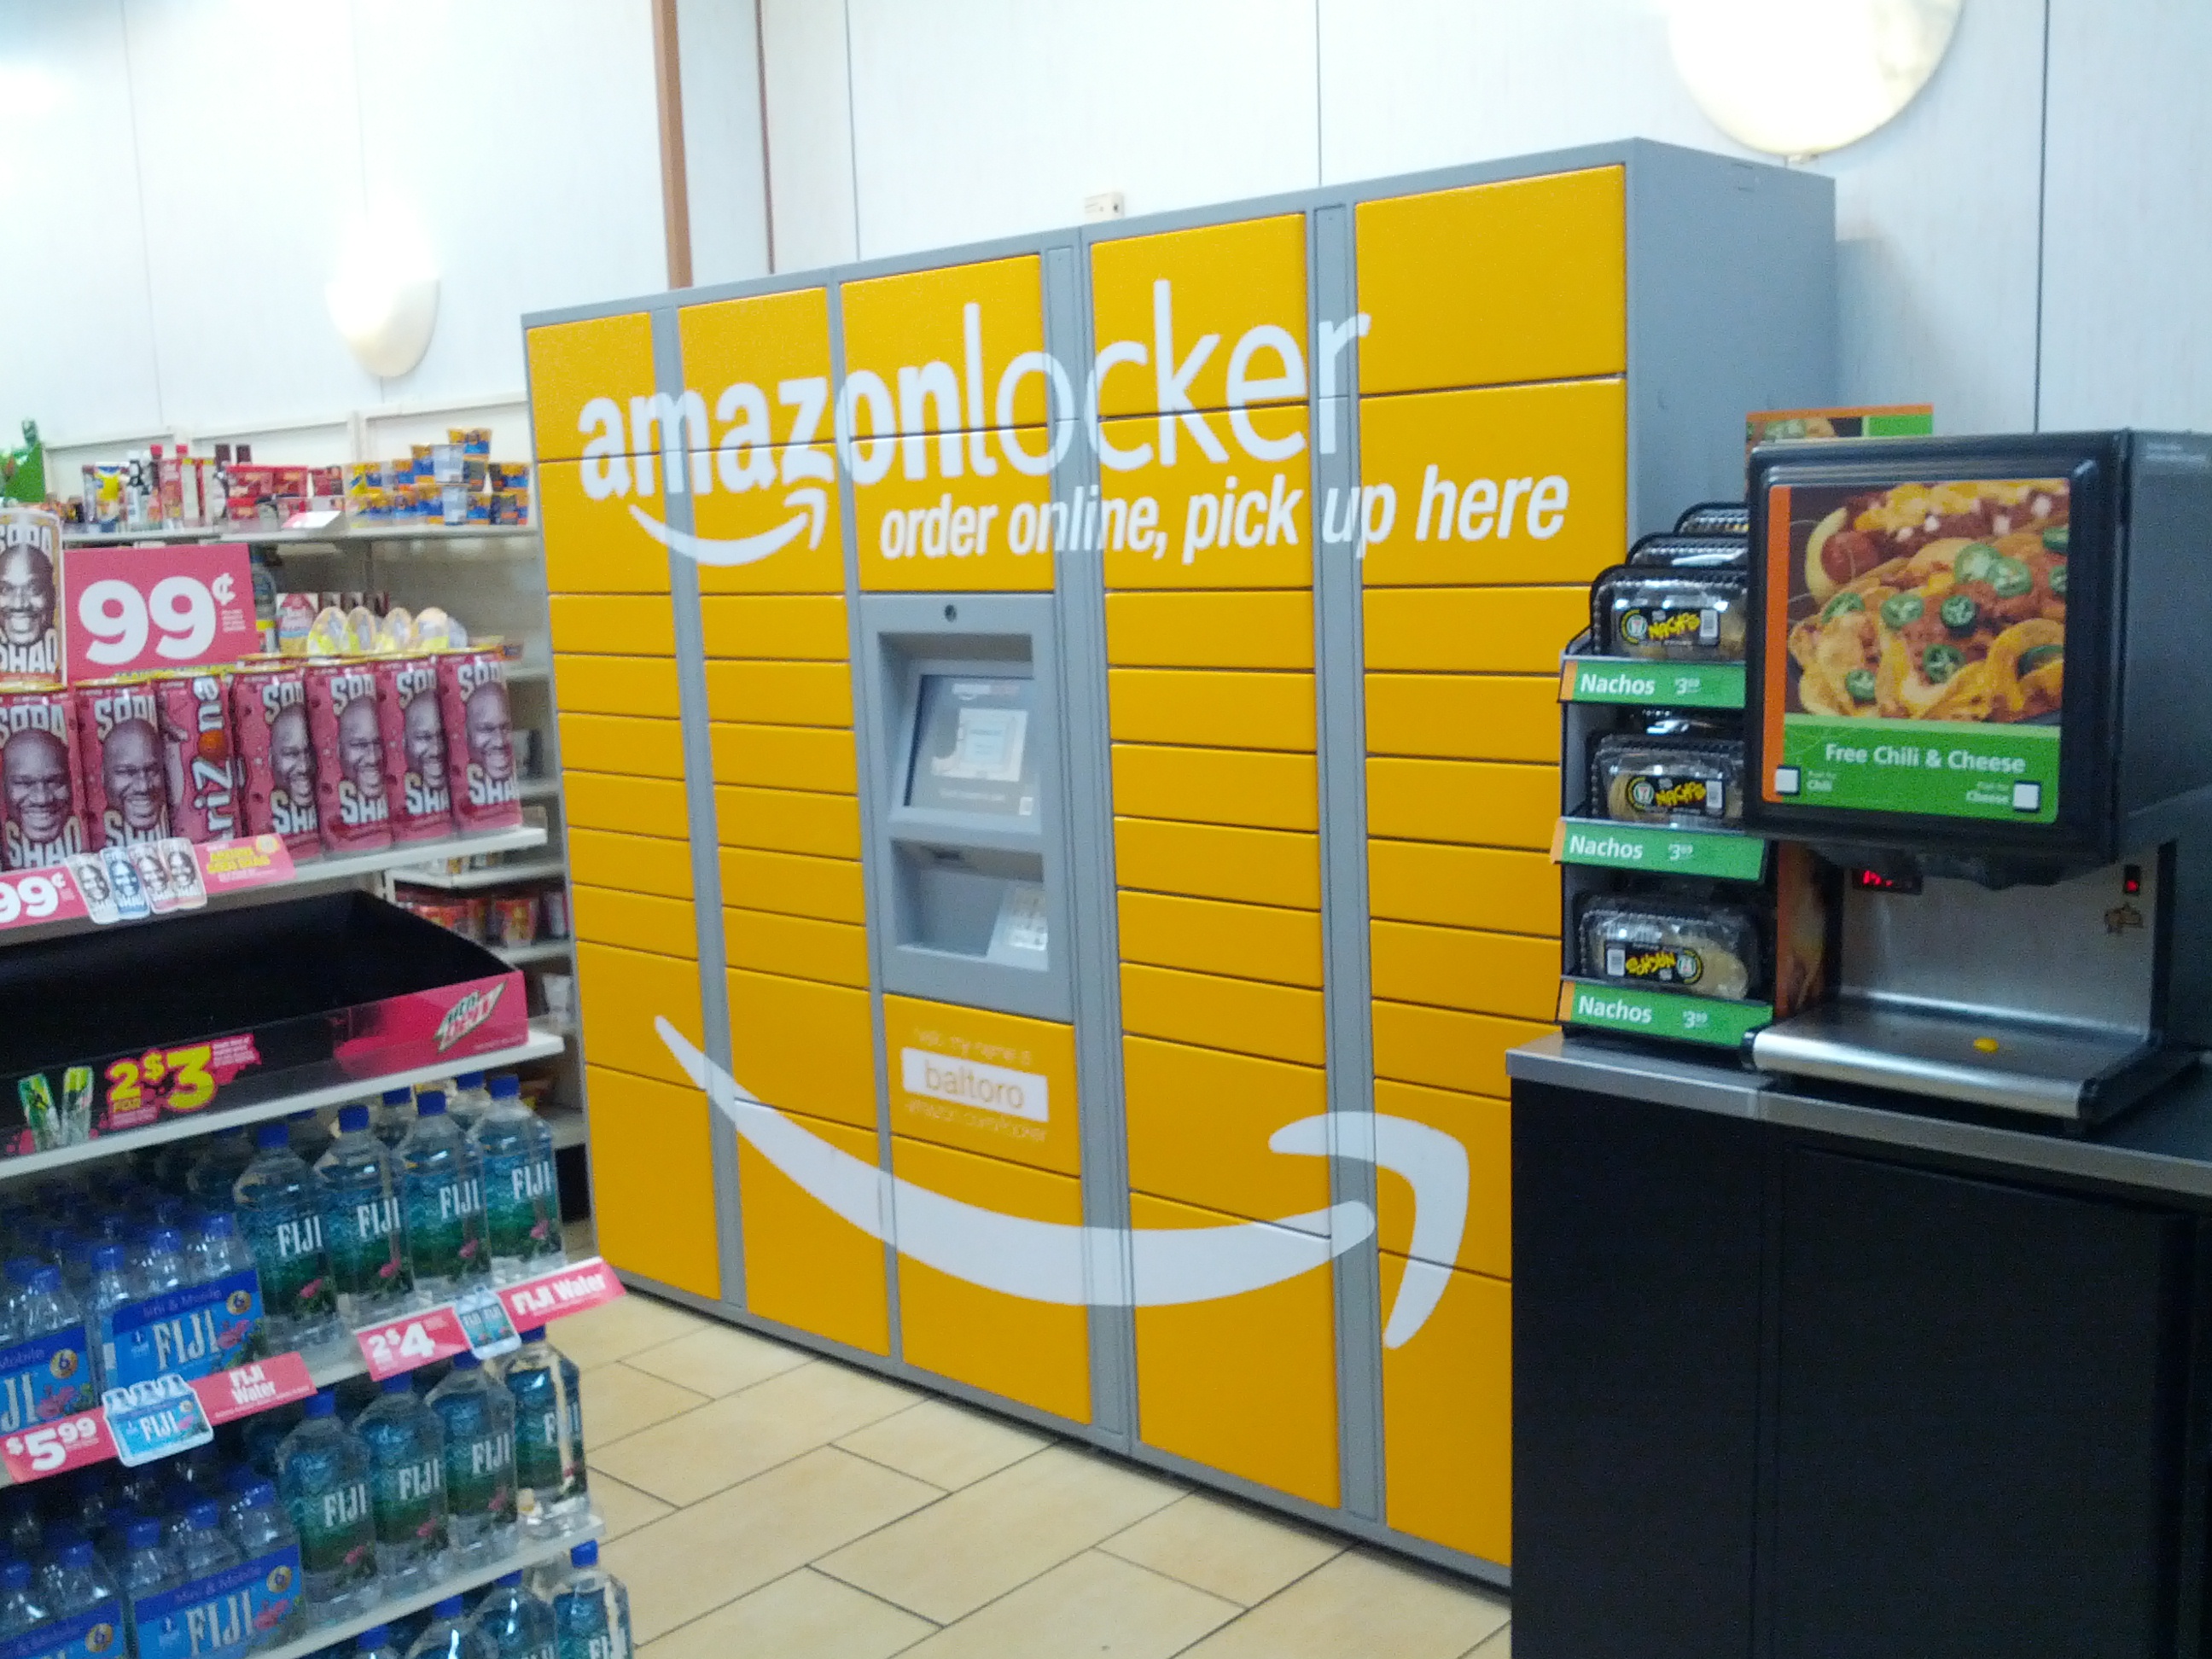 An Amazon Locker inside a store in New York. A similar locker is available at the 7-Eleven store at 5100 Geary here in the Richmond District.